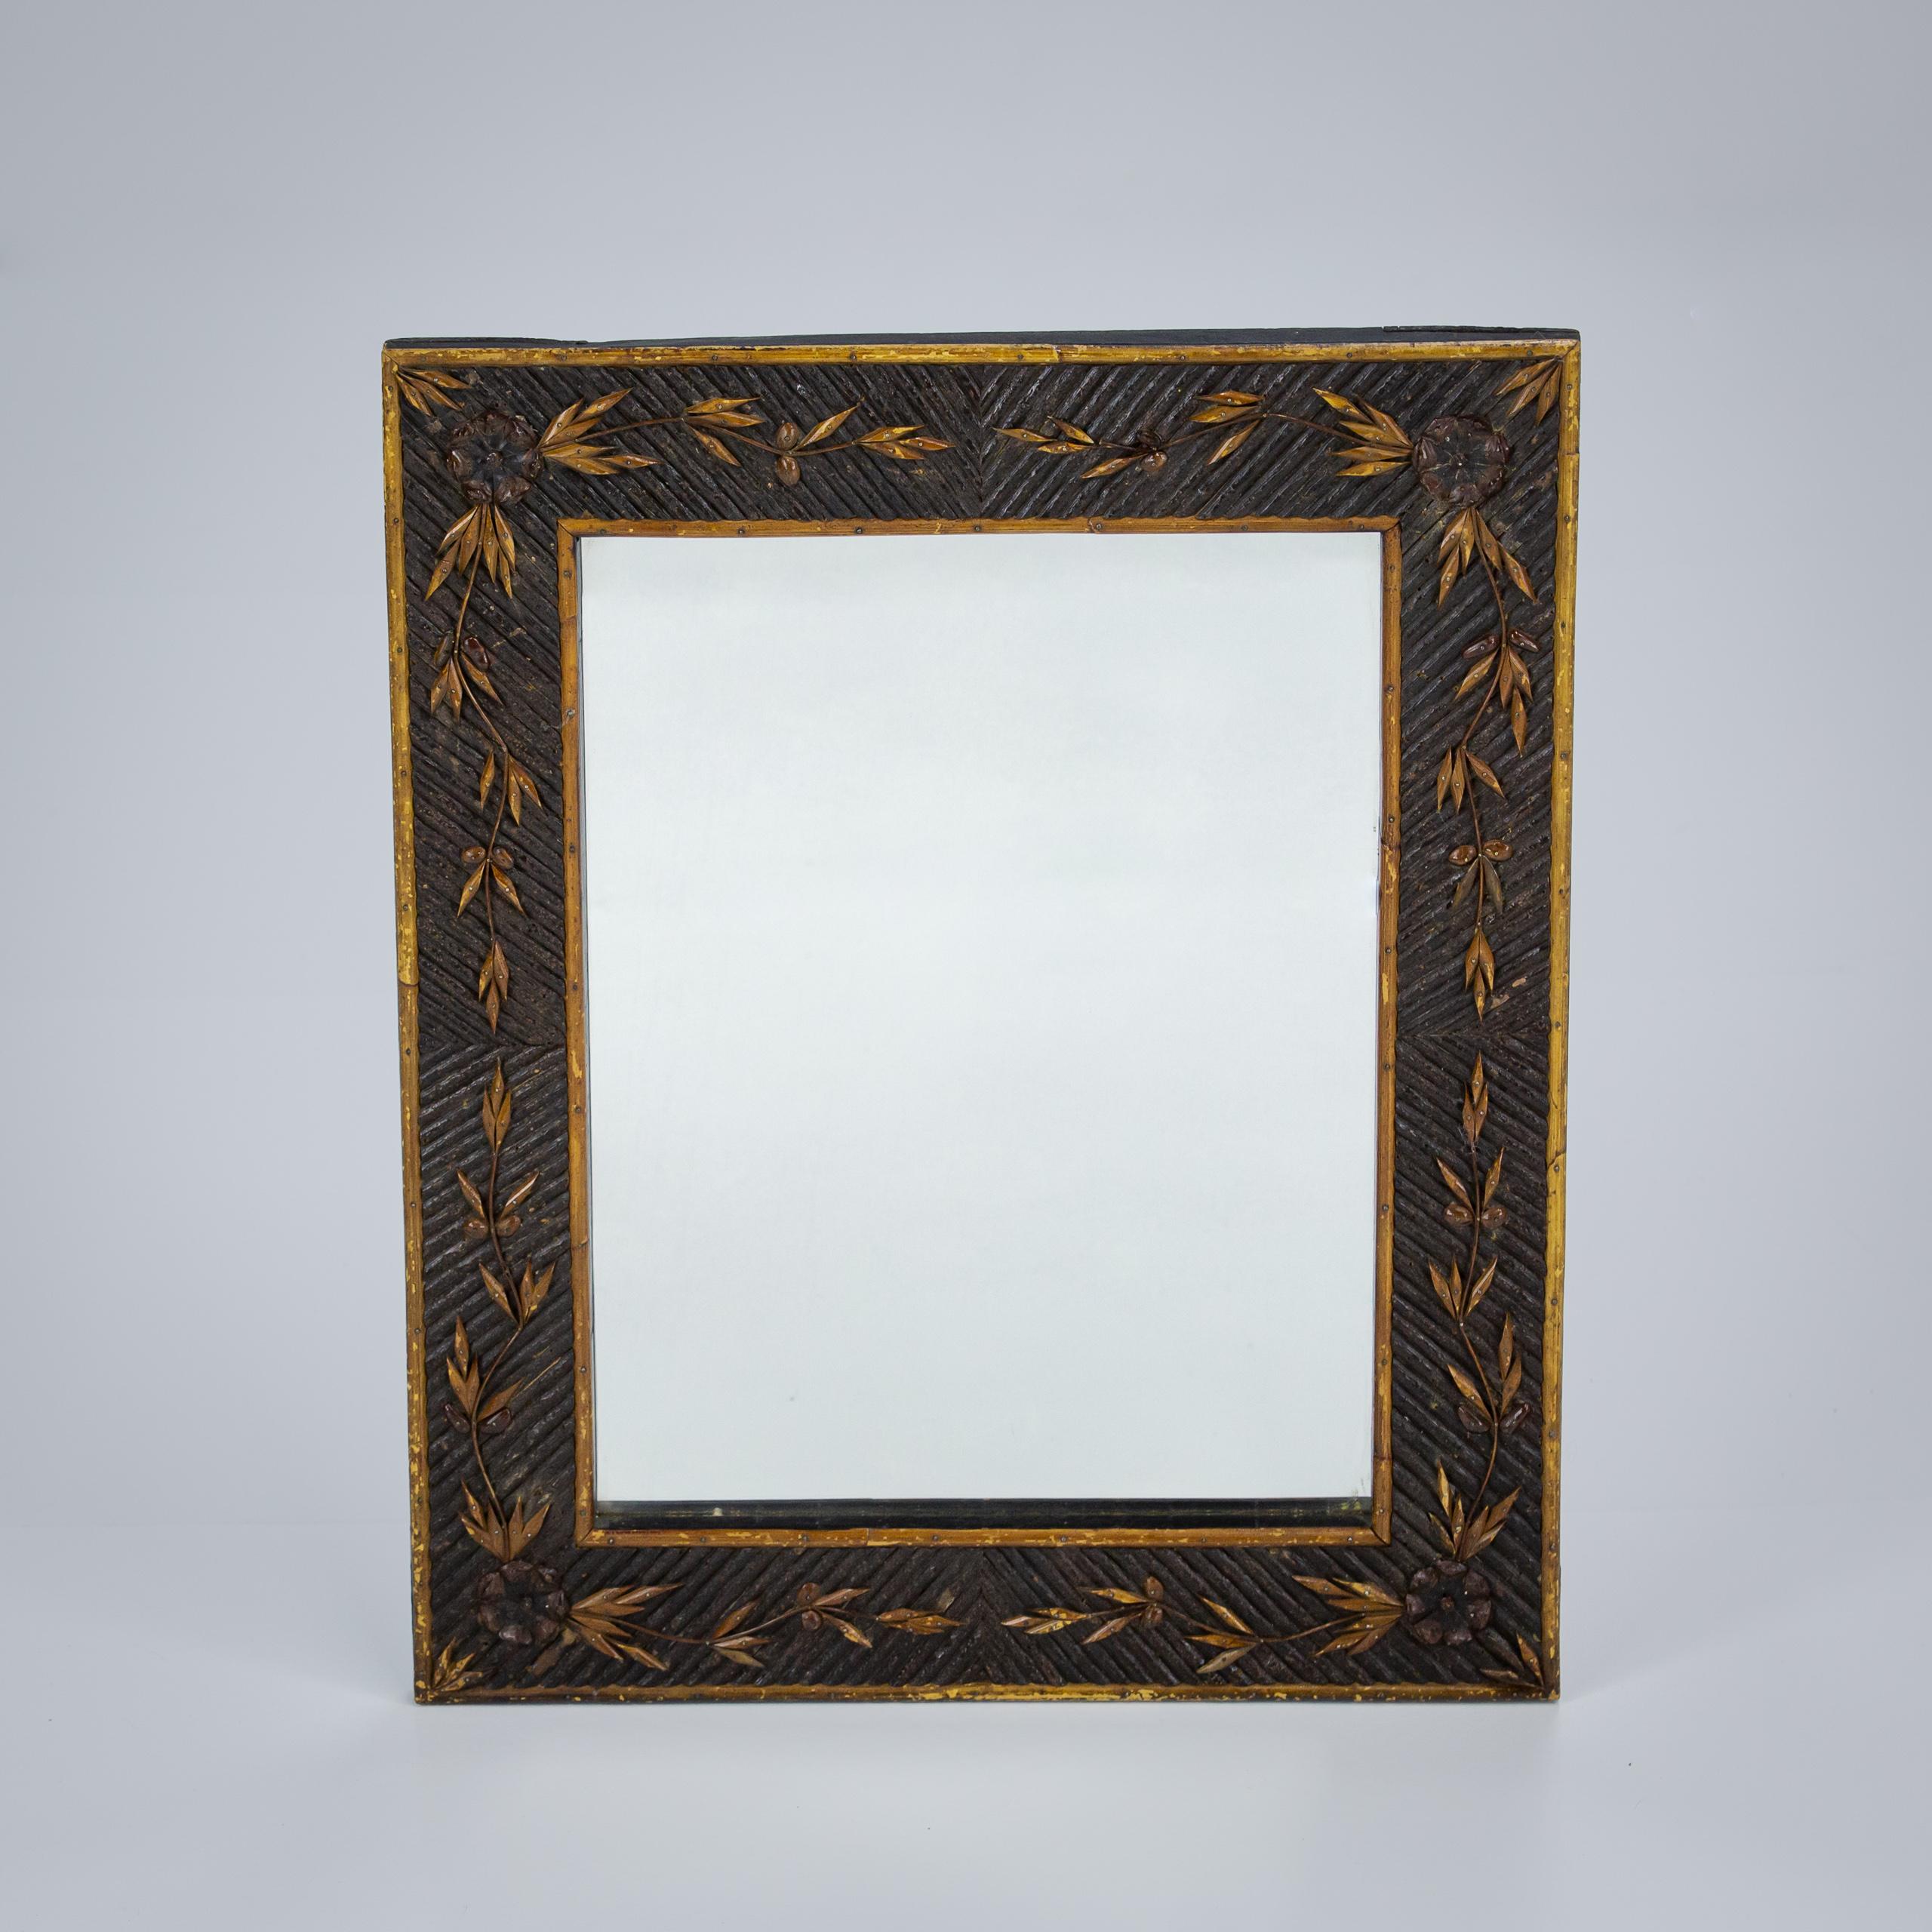 Exceptional Early 20th Century Twig work Mirror. Excellent condition with later mirror plate. France Circa 1920.

Excellent condition with excellent execution 

